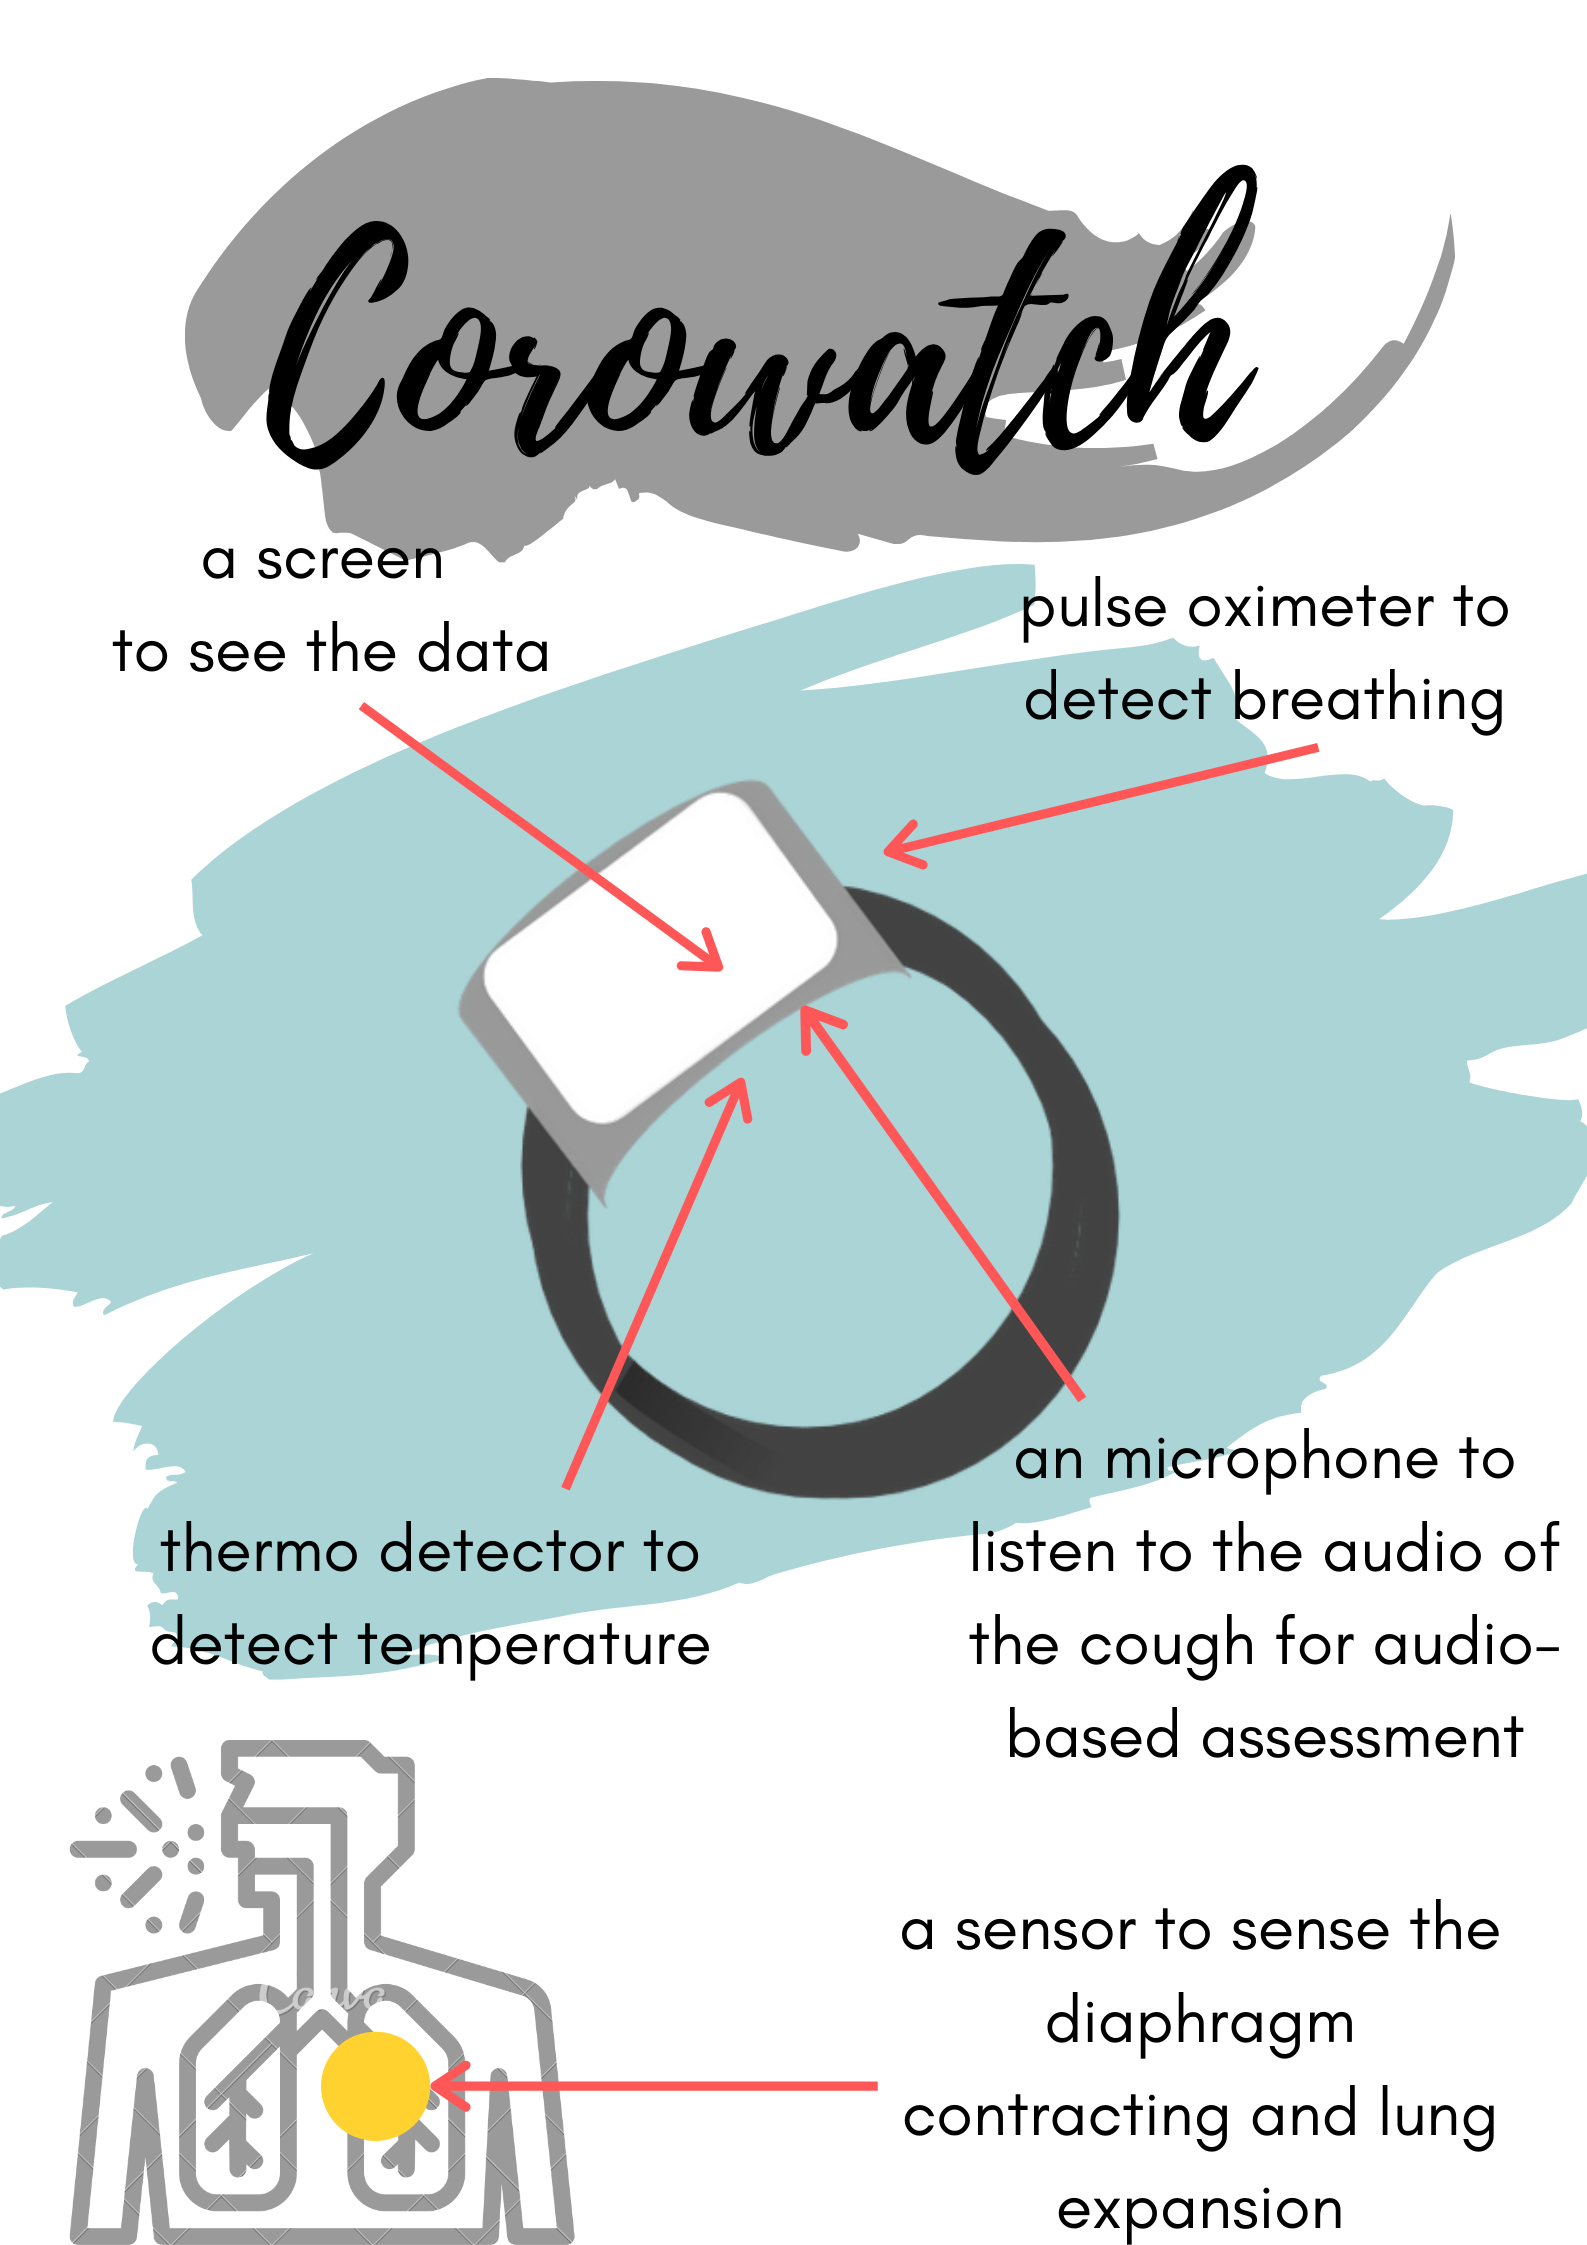 "an image explaining how the Corowatch works"